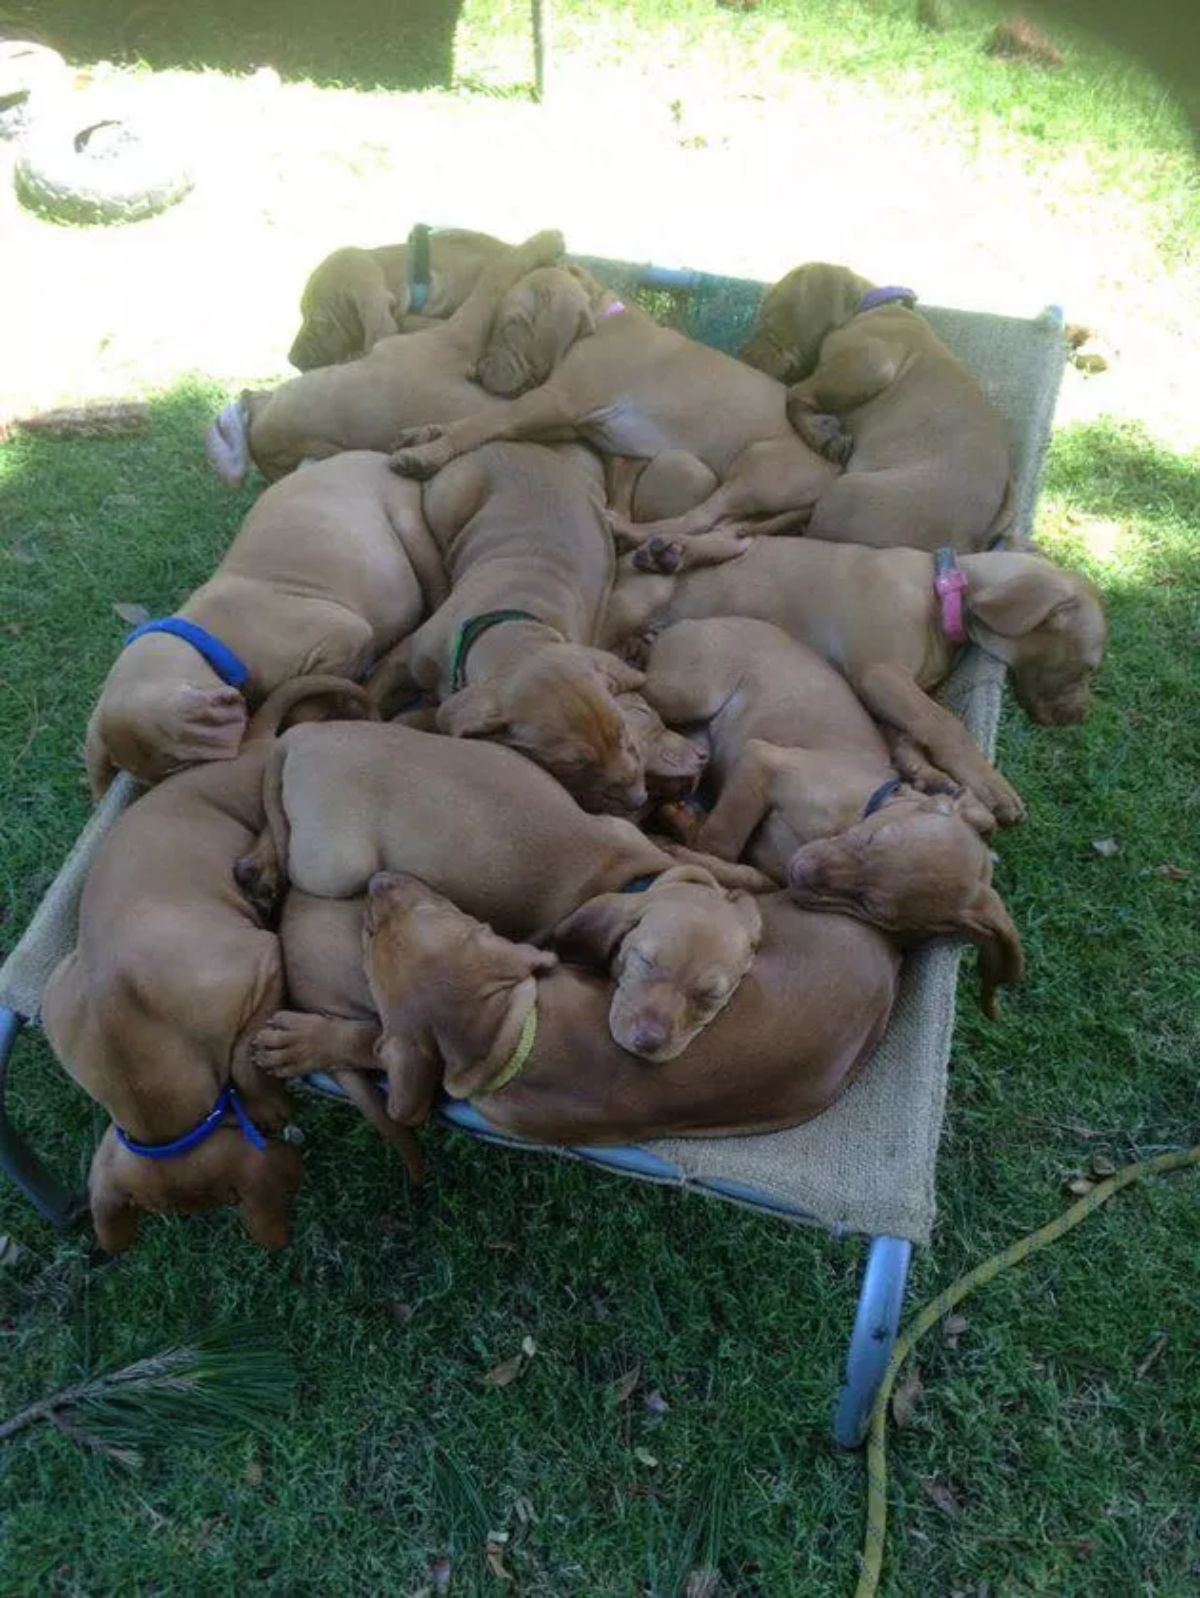 bunch of brown puppies sleeping on a blue bed on the grass